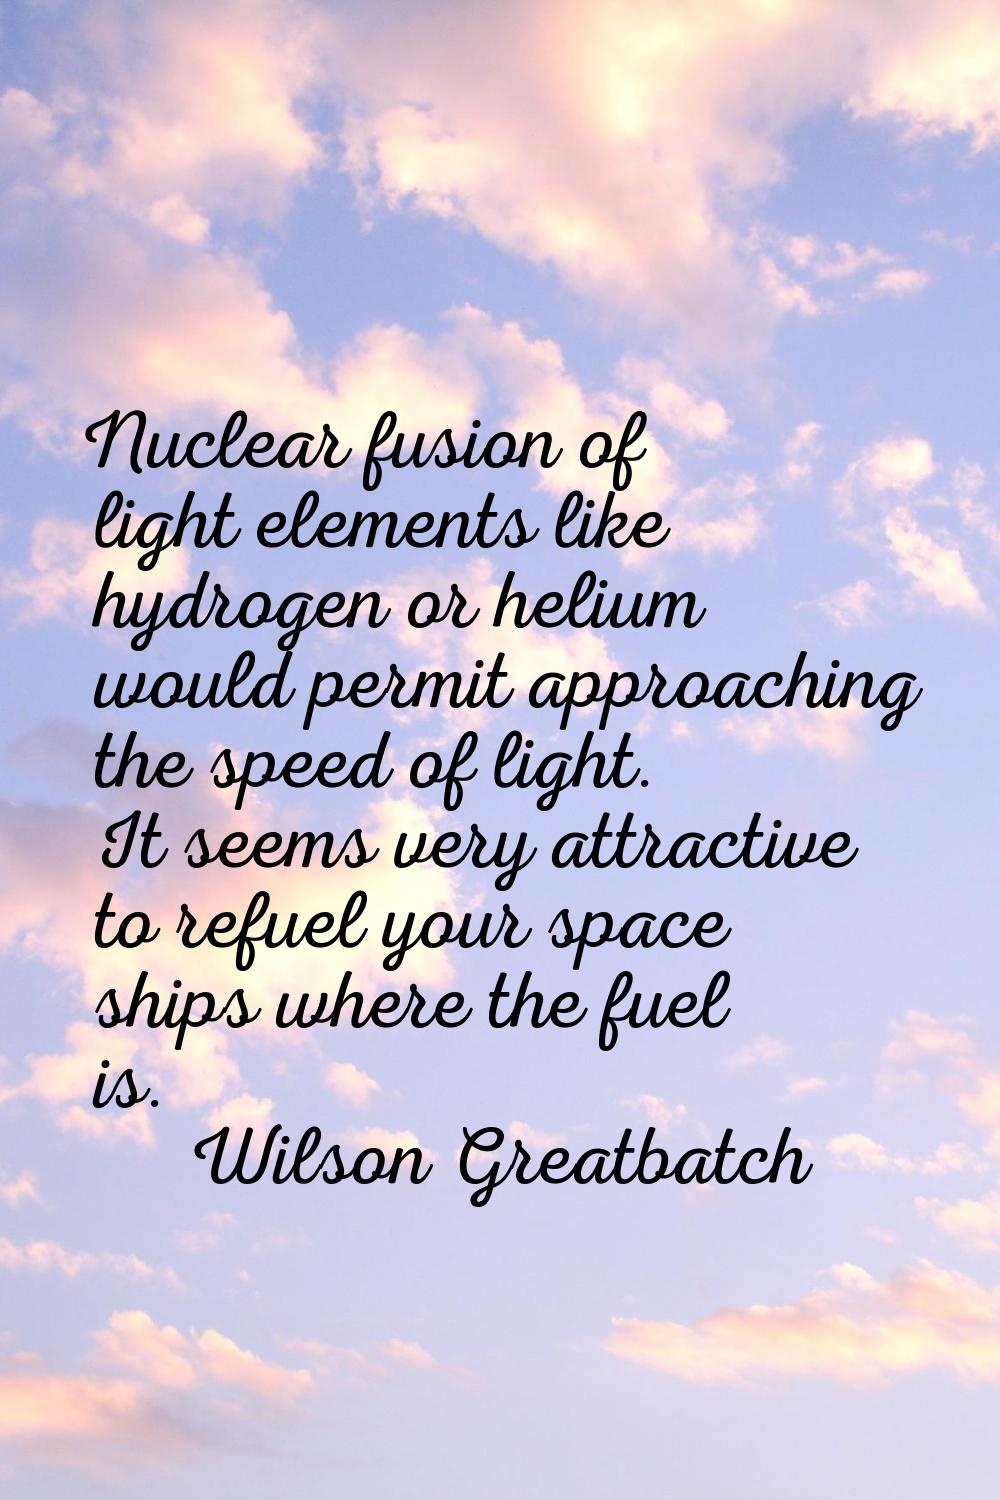 Nuclear fusion of light elements like hydrogen or helium would permit approaching the speed of ligh